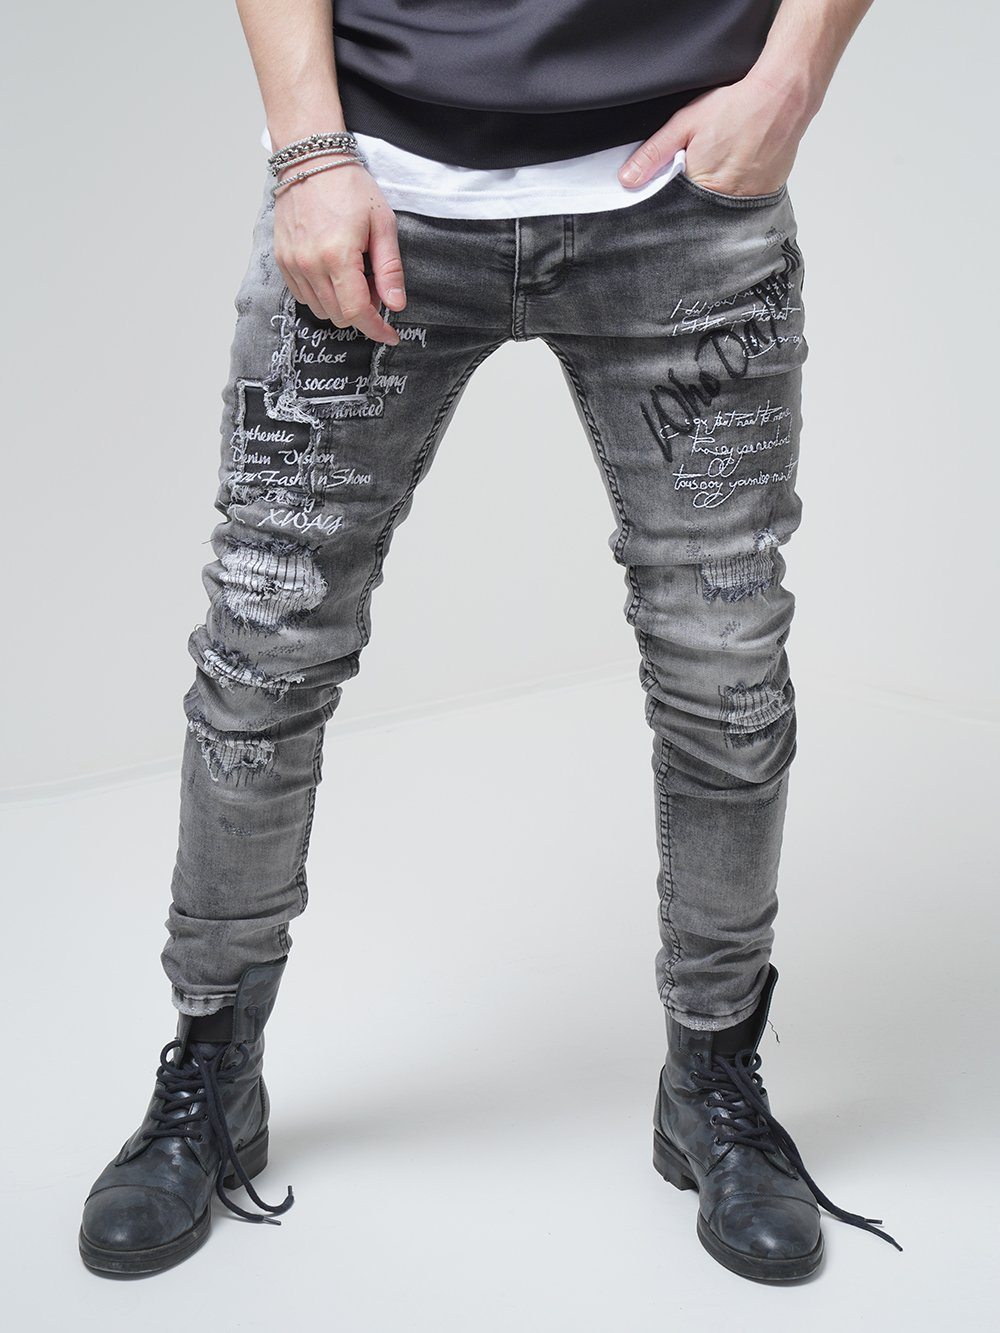 A man sporting LONDON skinny-fit ripped jeans as part of his streetwear-inspired outfit.